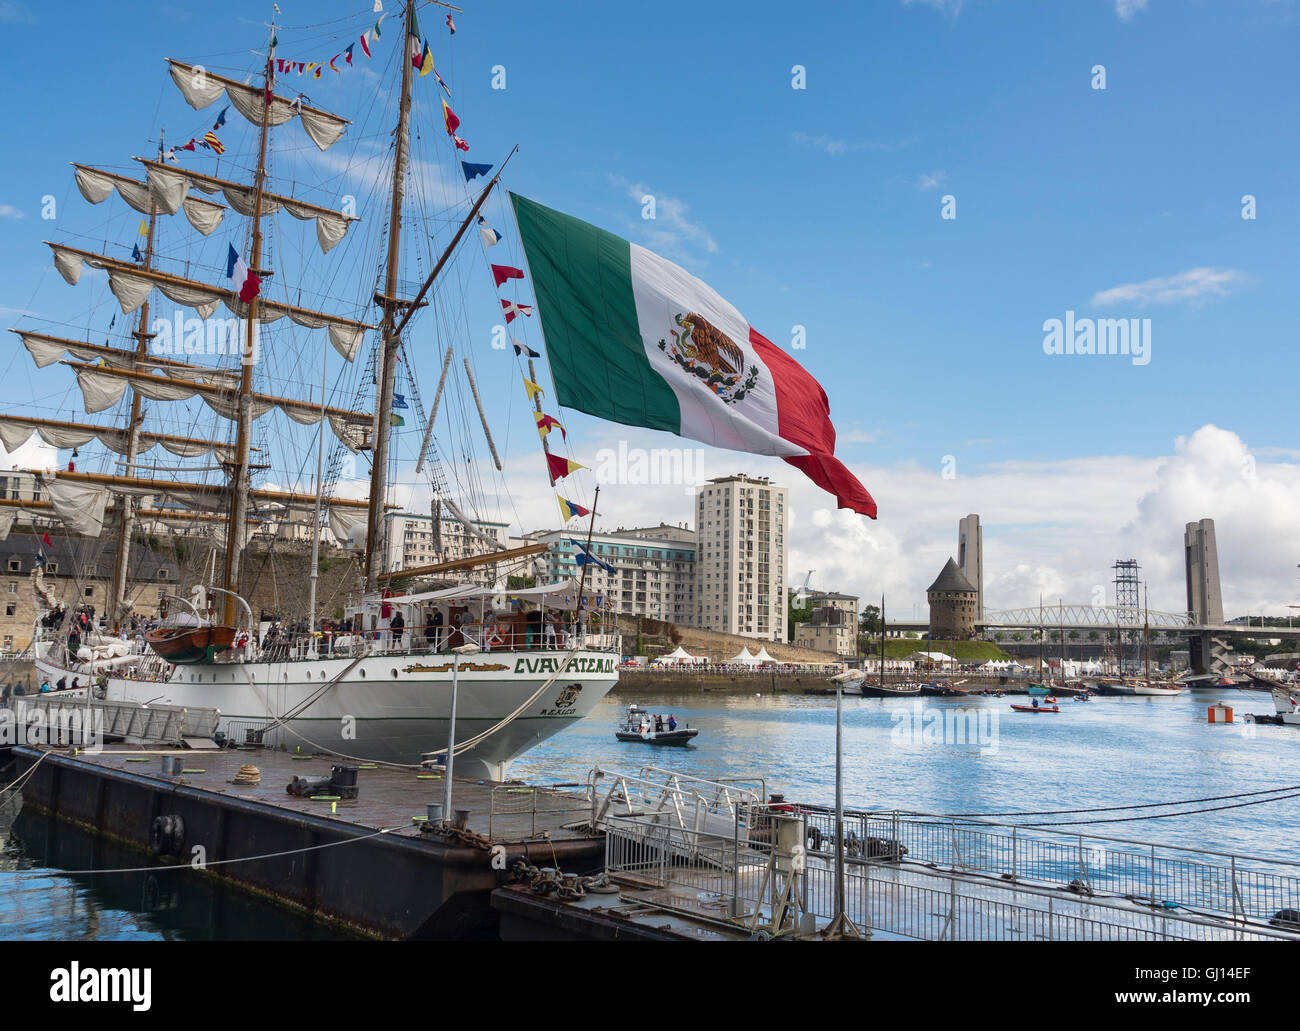 Mexican flag floats on the school sailboat Cuauhtémoc moored on Penfeld during the Brest’s International Maritime Festival 2016. Stock Photo